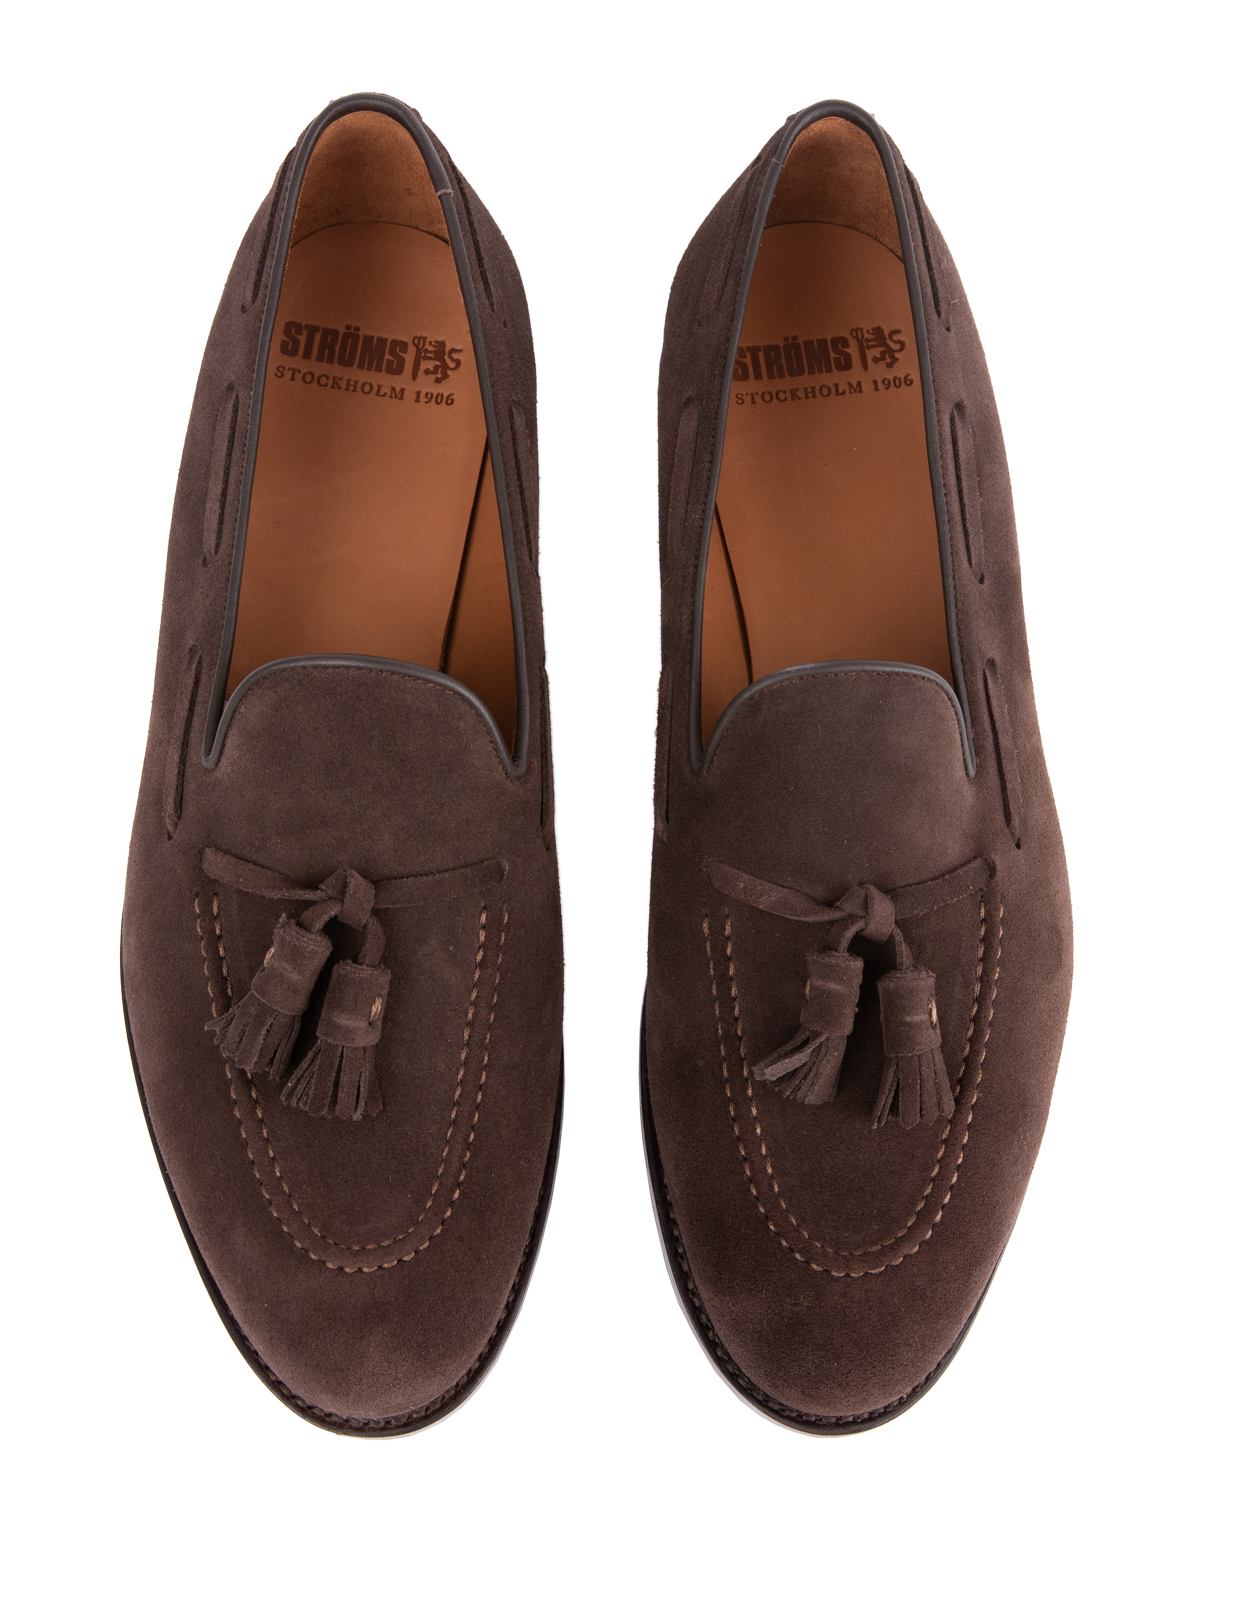 Tassel Loafers Suede Bitter Chocolate Stl 7.5